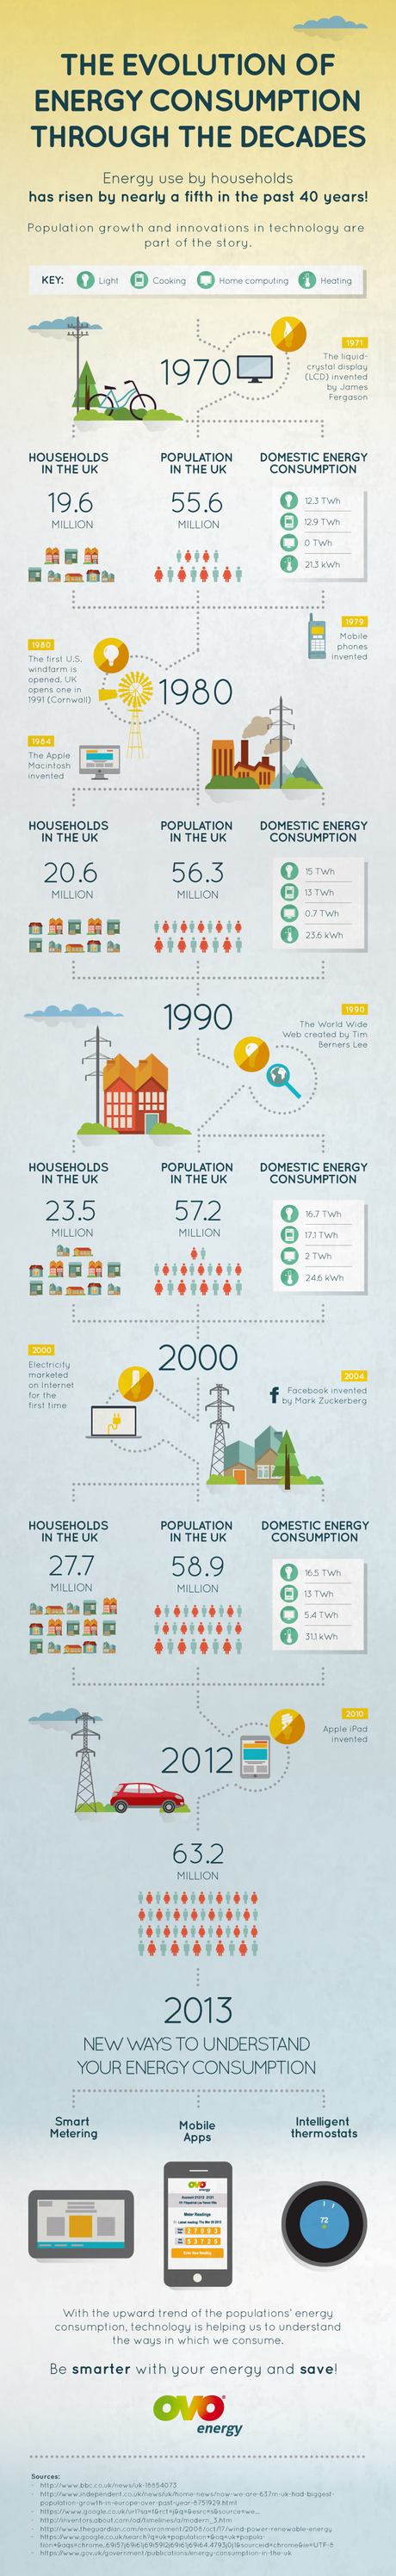 The evolution of energy consumption through the decades